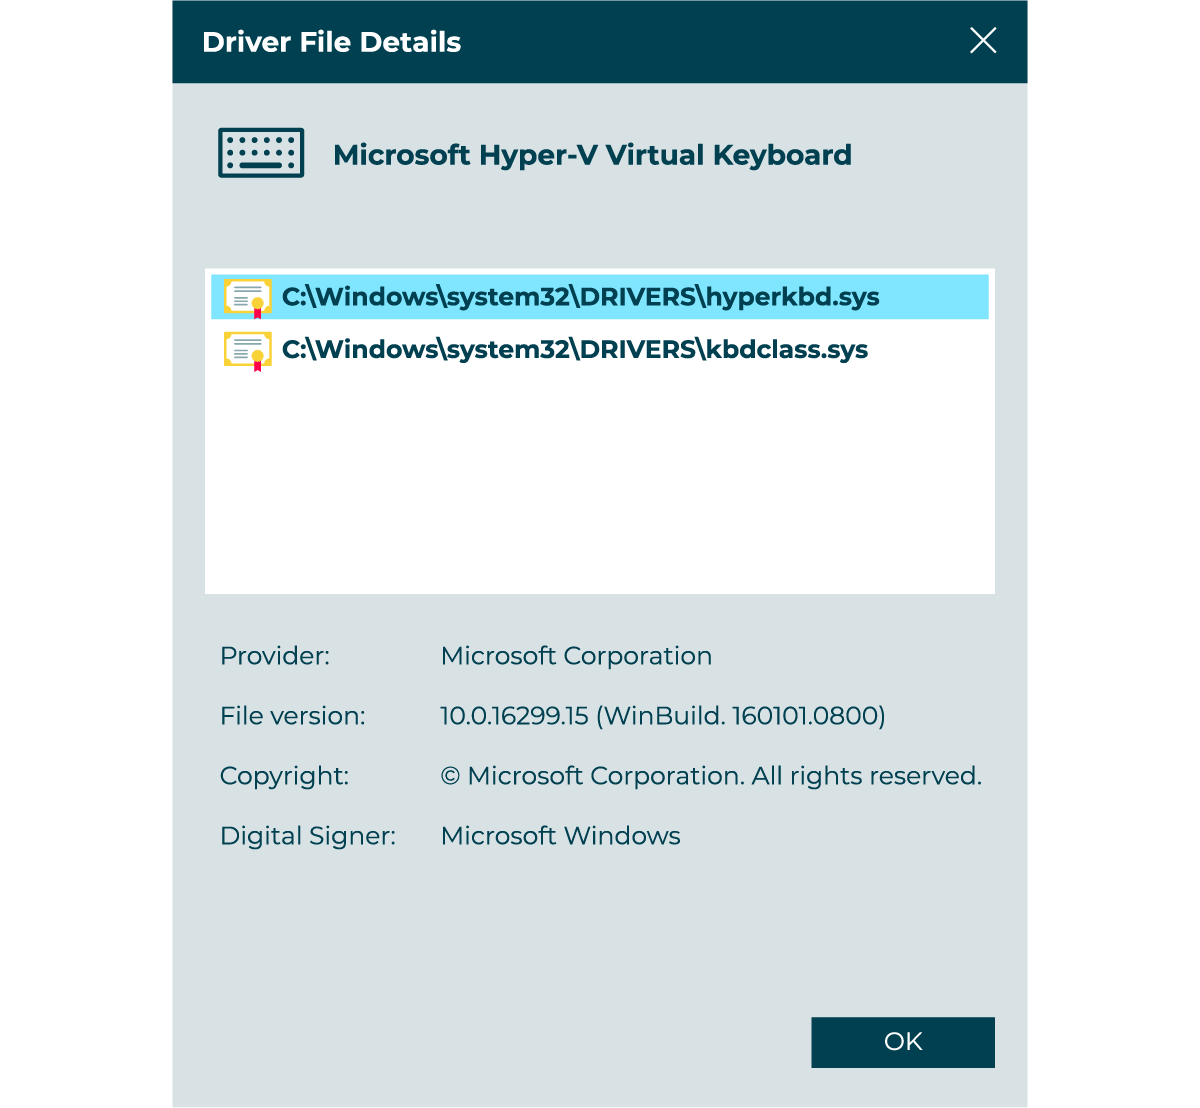 An example of a Driver File Details dialog box for a virtual keyboard driver. It details the provider, the file version, the copyright, and the digital signer.